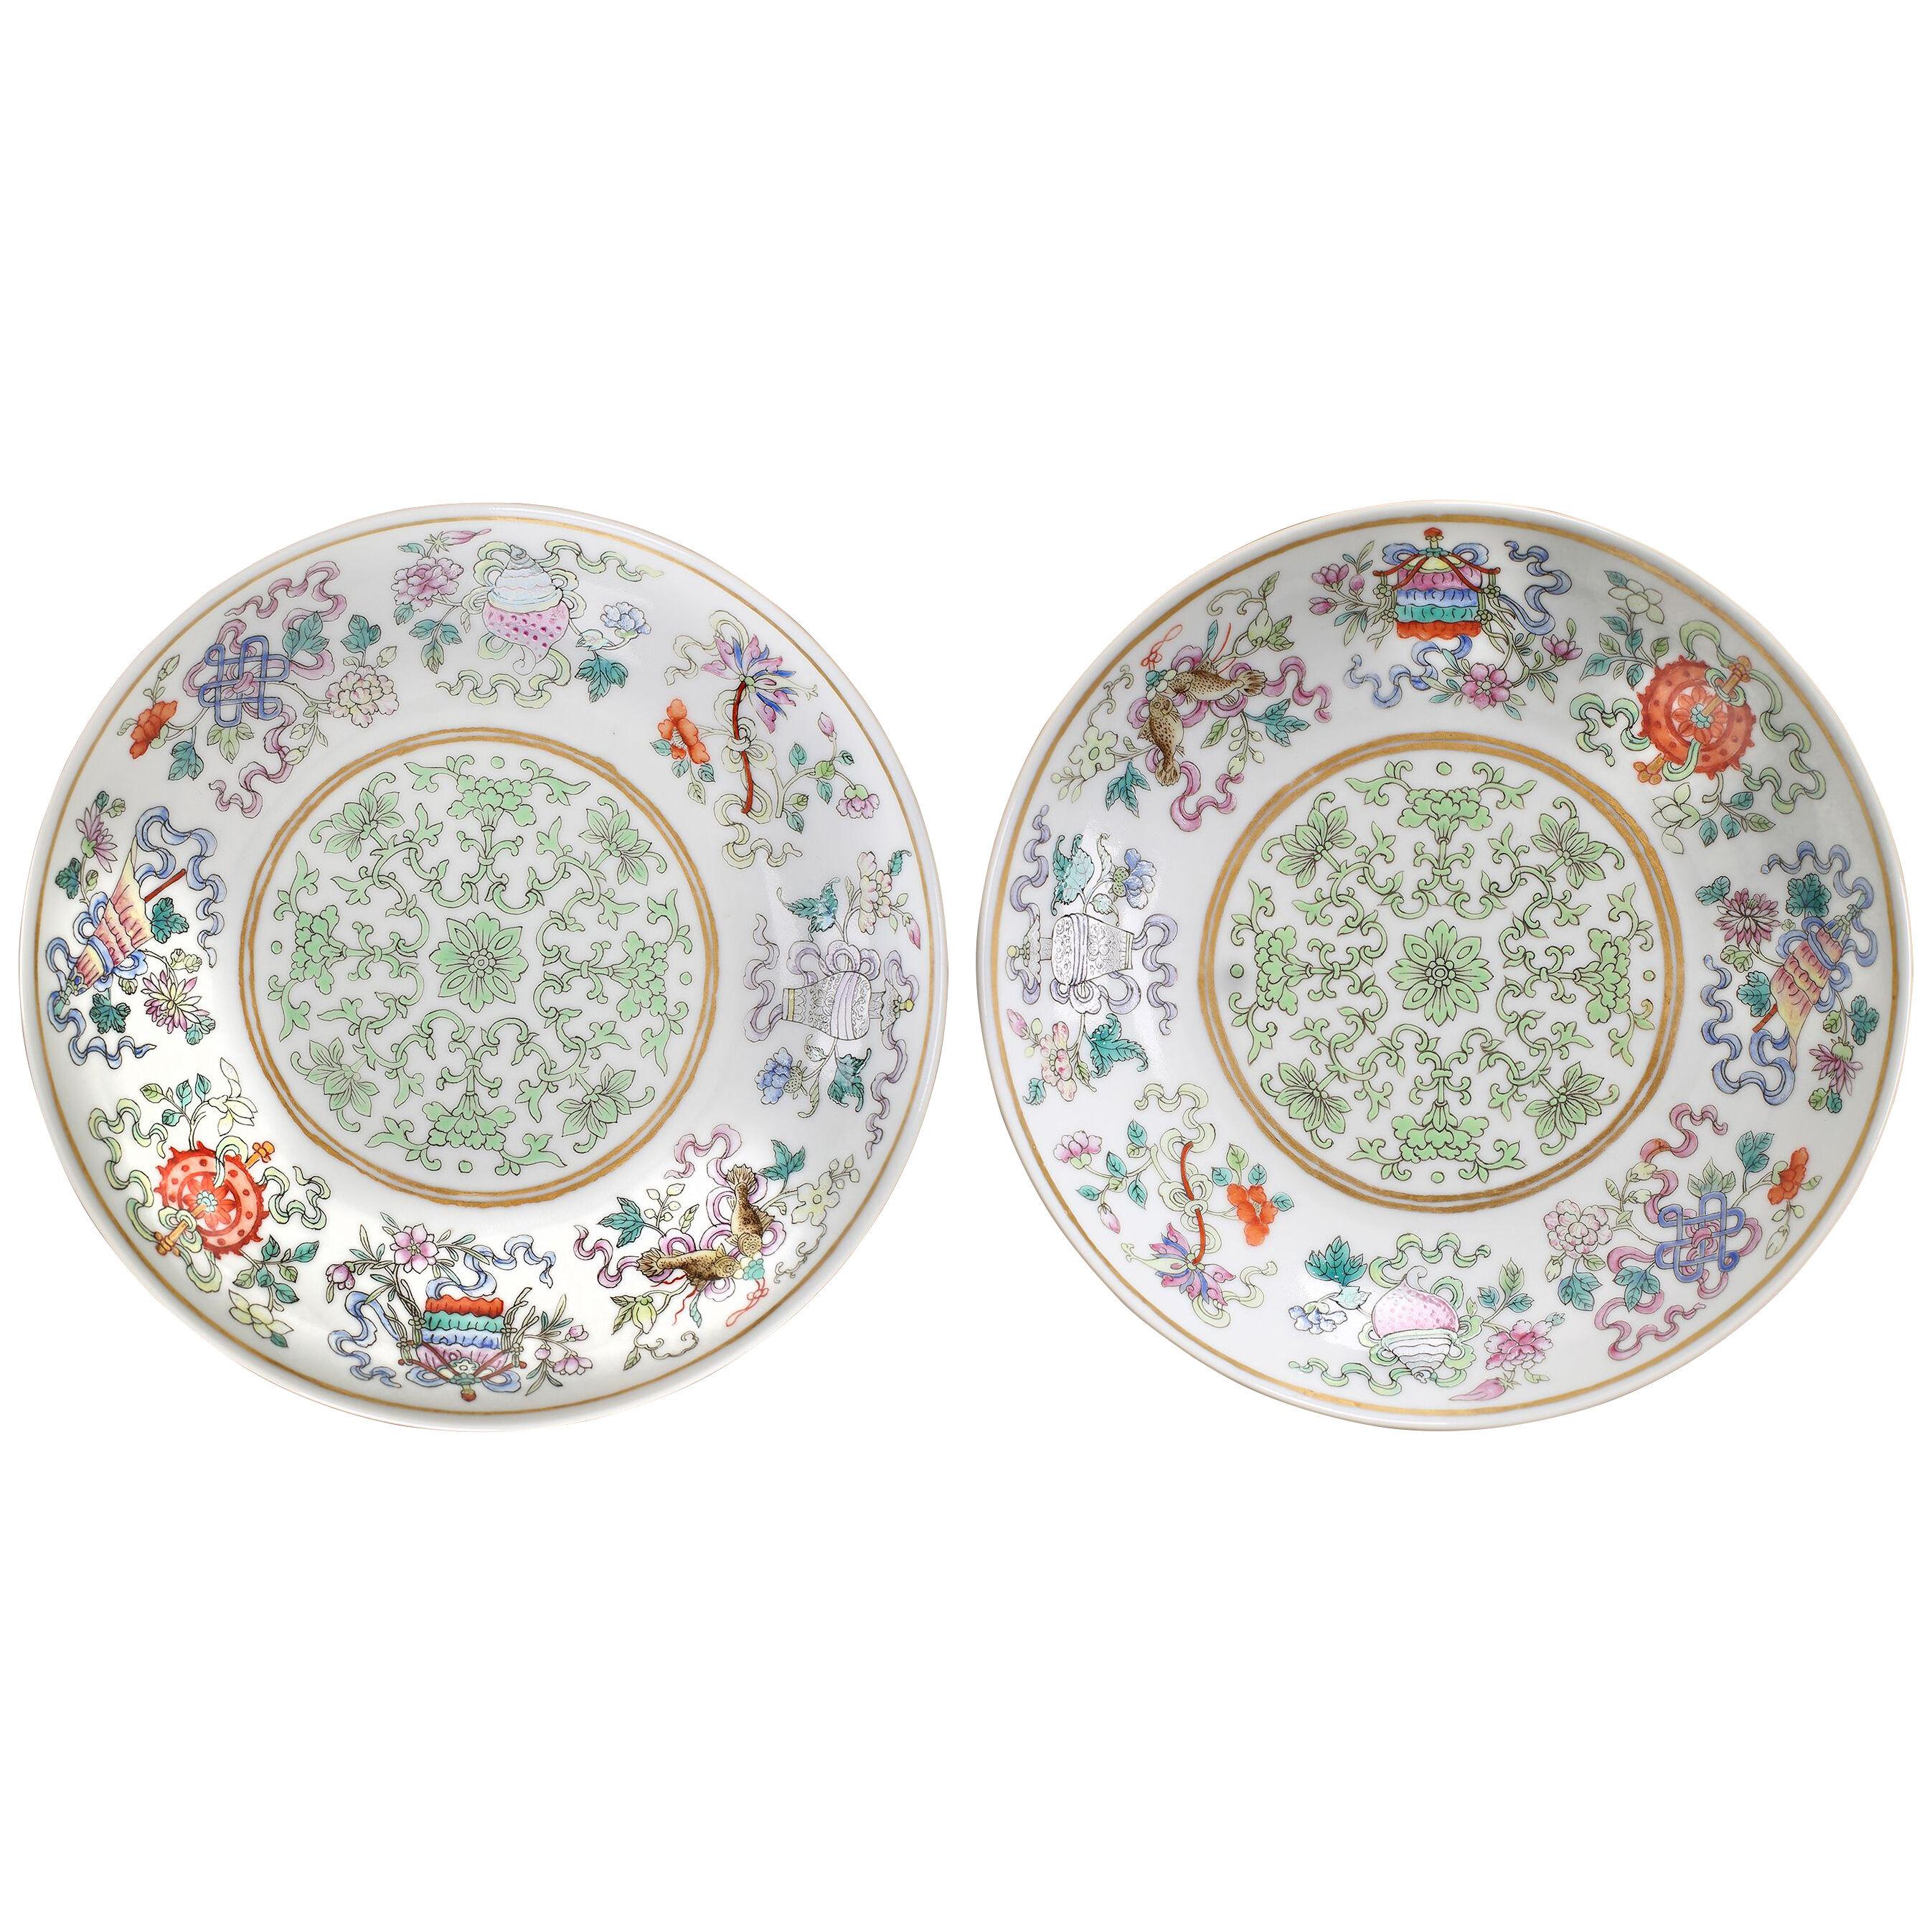 A pair of Chinese imperial porcelain famille rose enamelled fencai saucer dishes